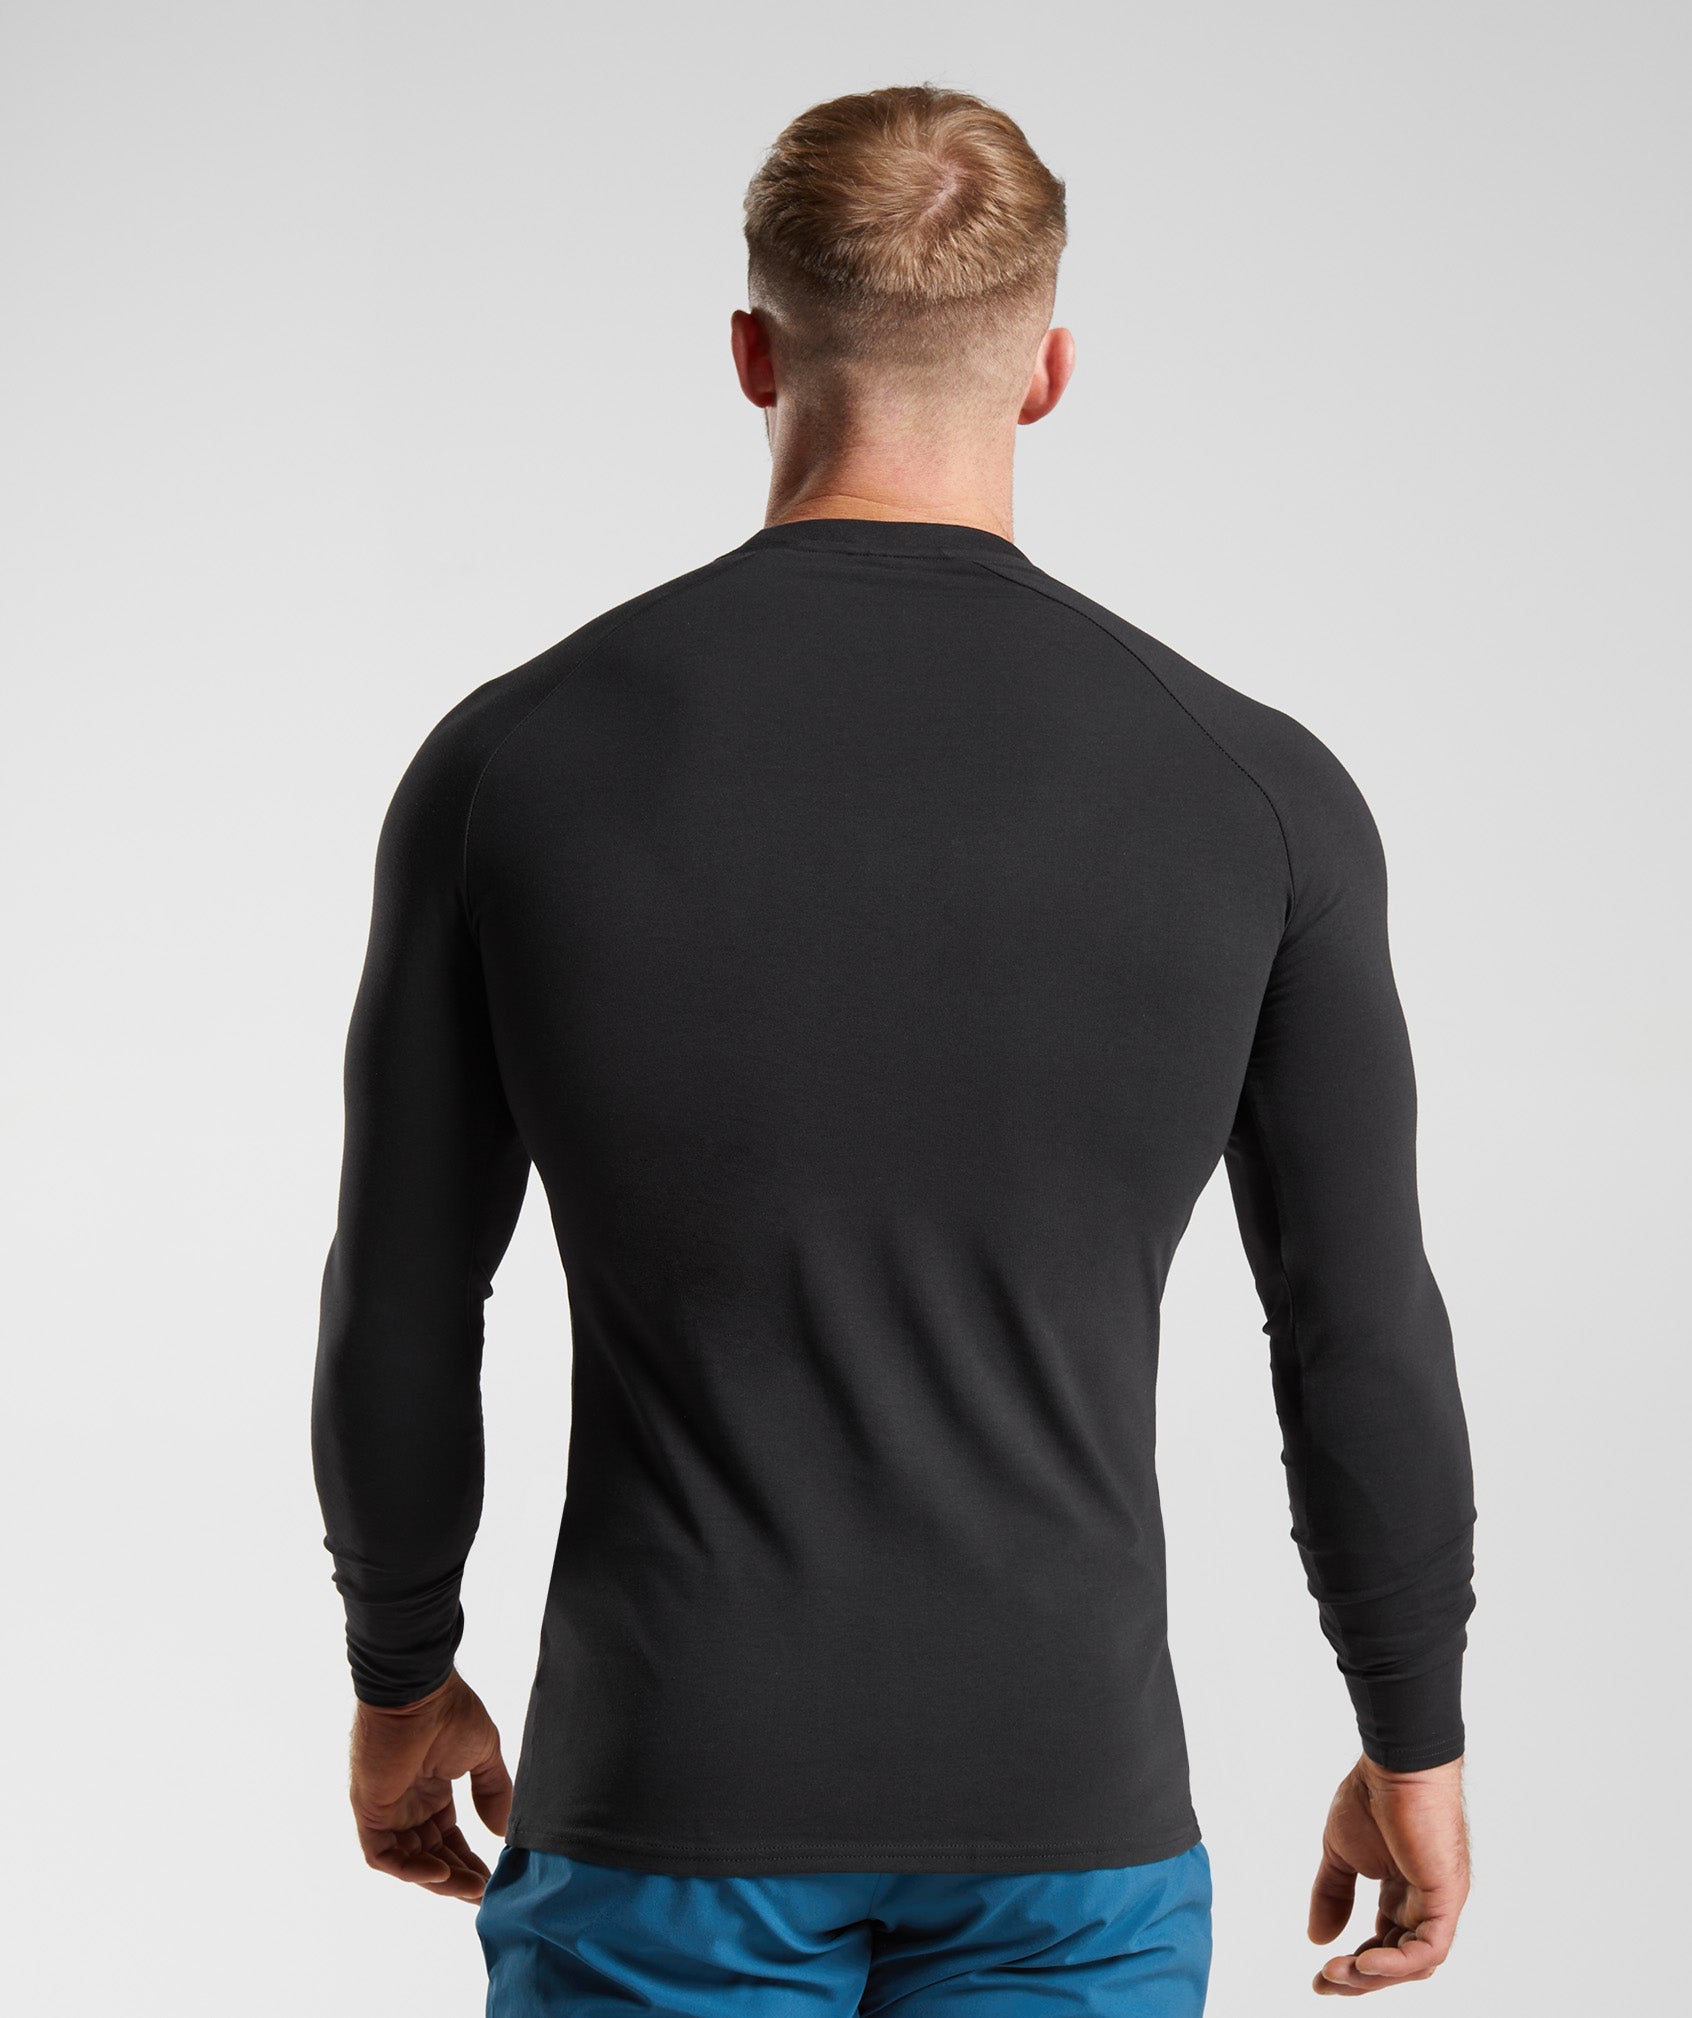 Gymshark Apollo Hoodie Black Size L - $23 (58% Off Retail) - From Shelby